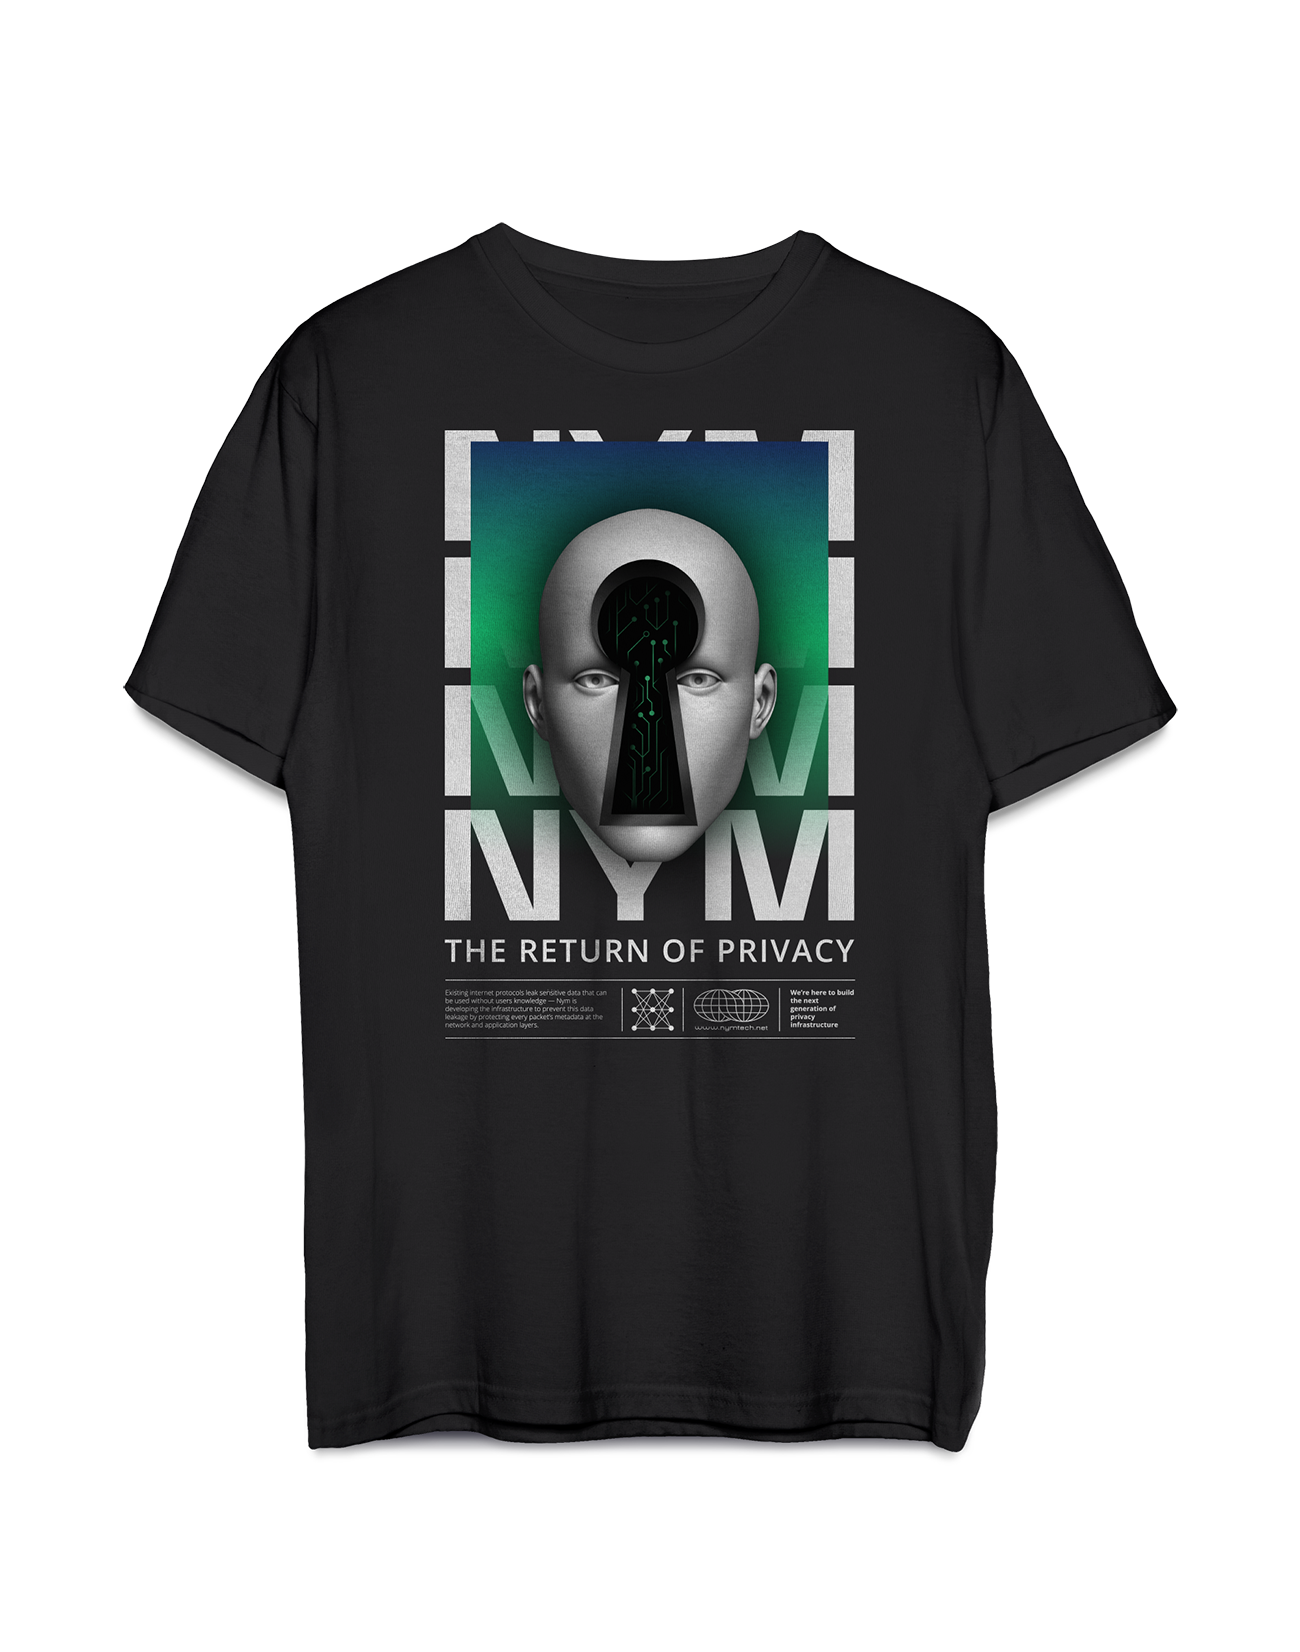 Our Privacy black unisex t-shirt